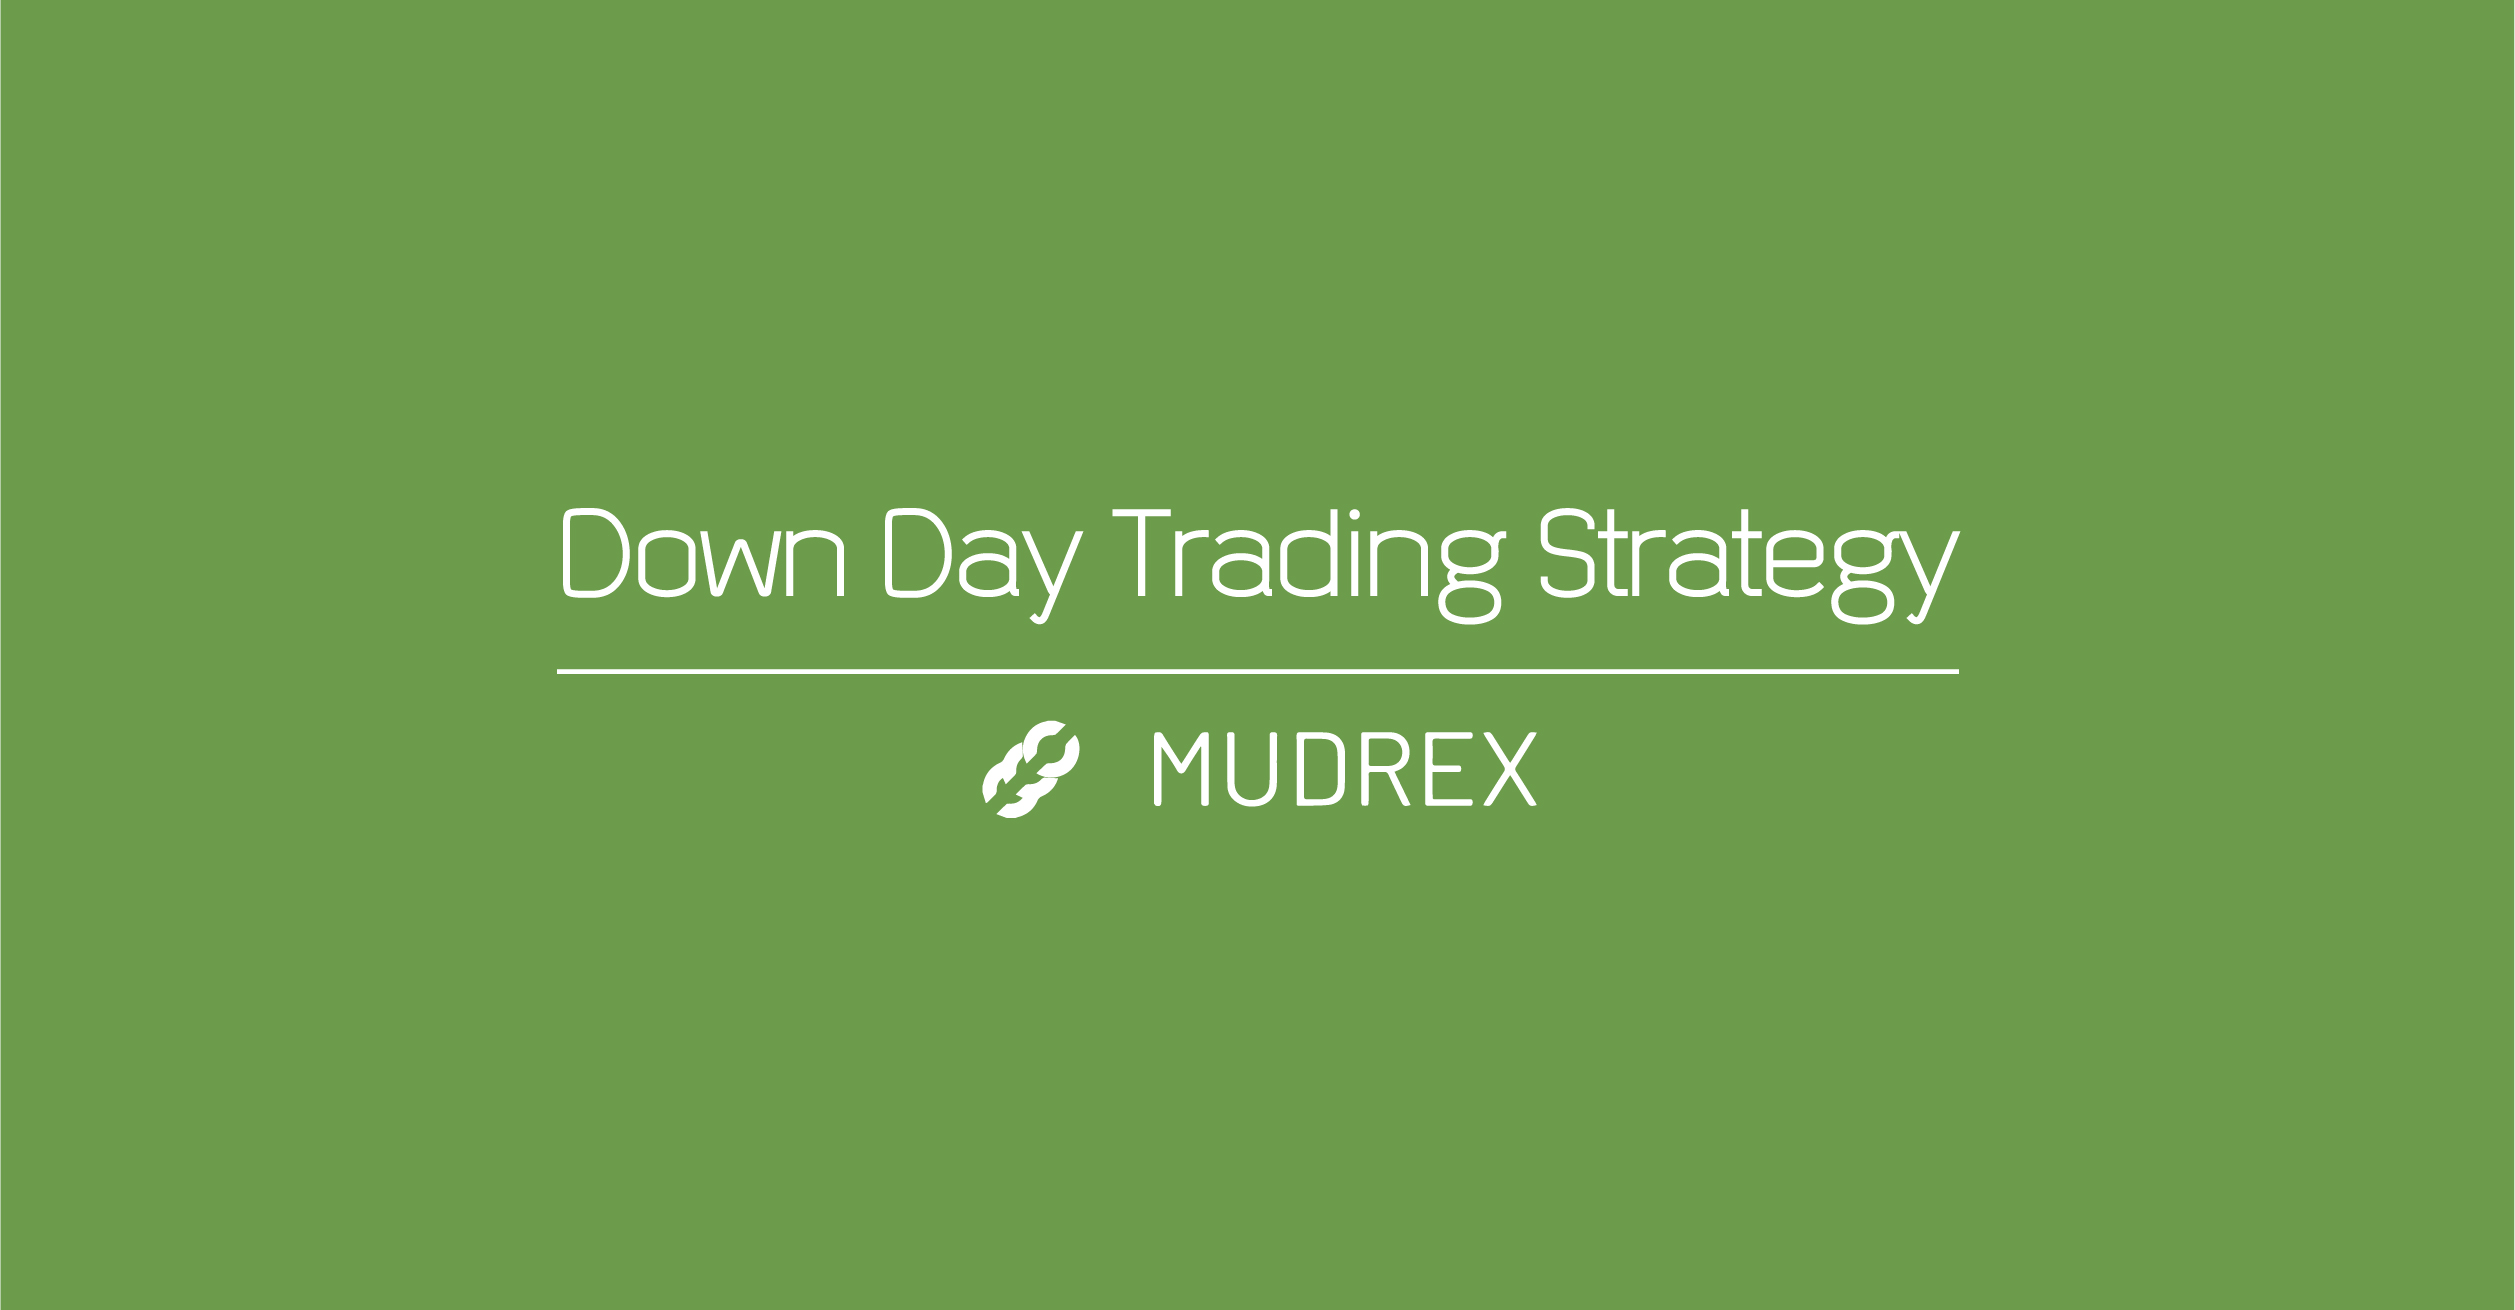 Down Day Trading Strategy